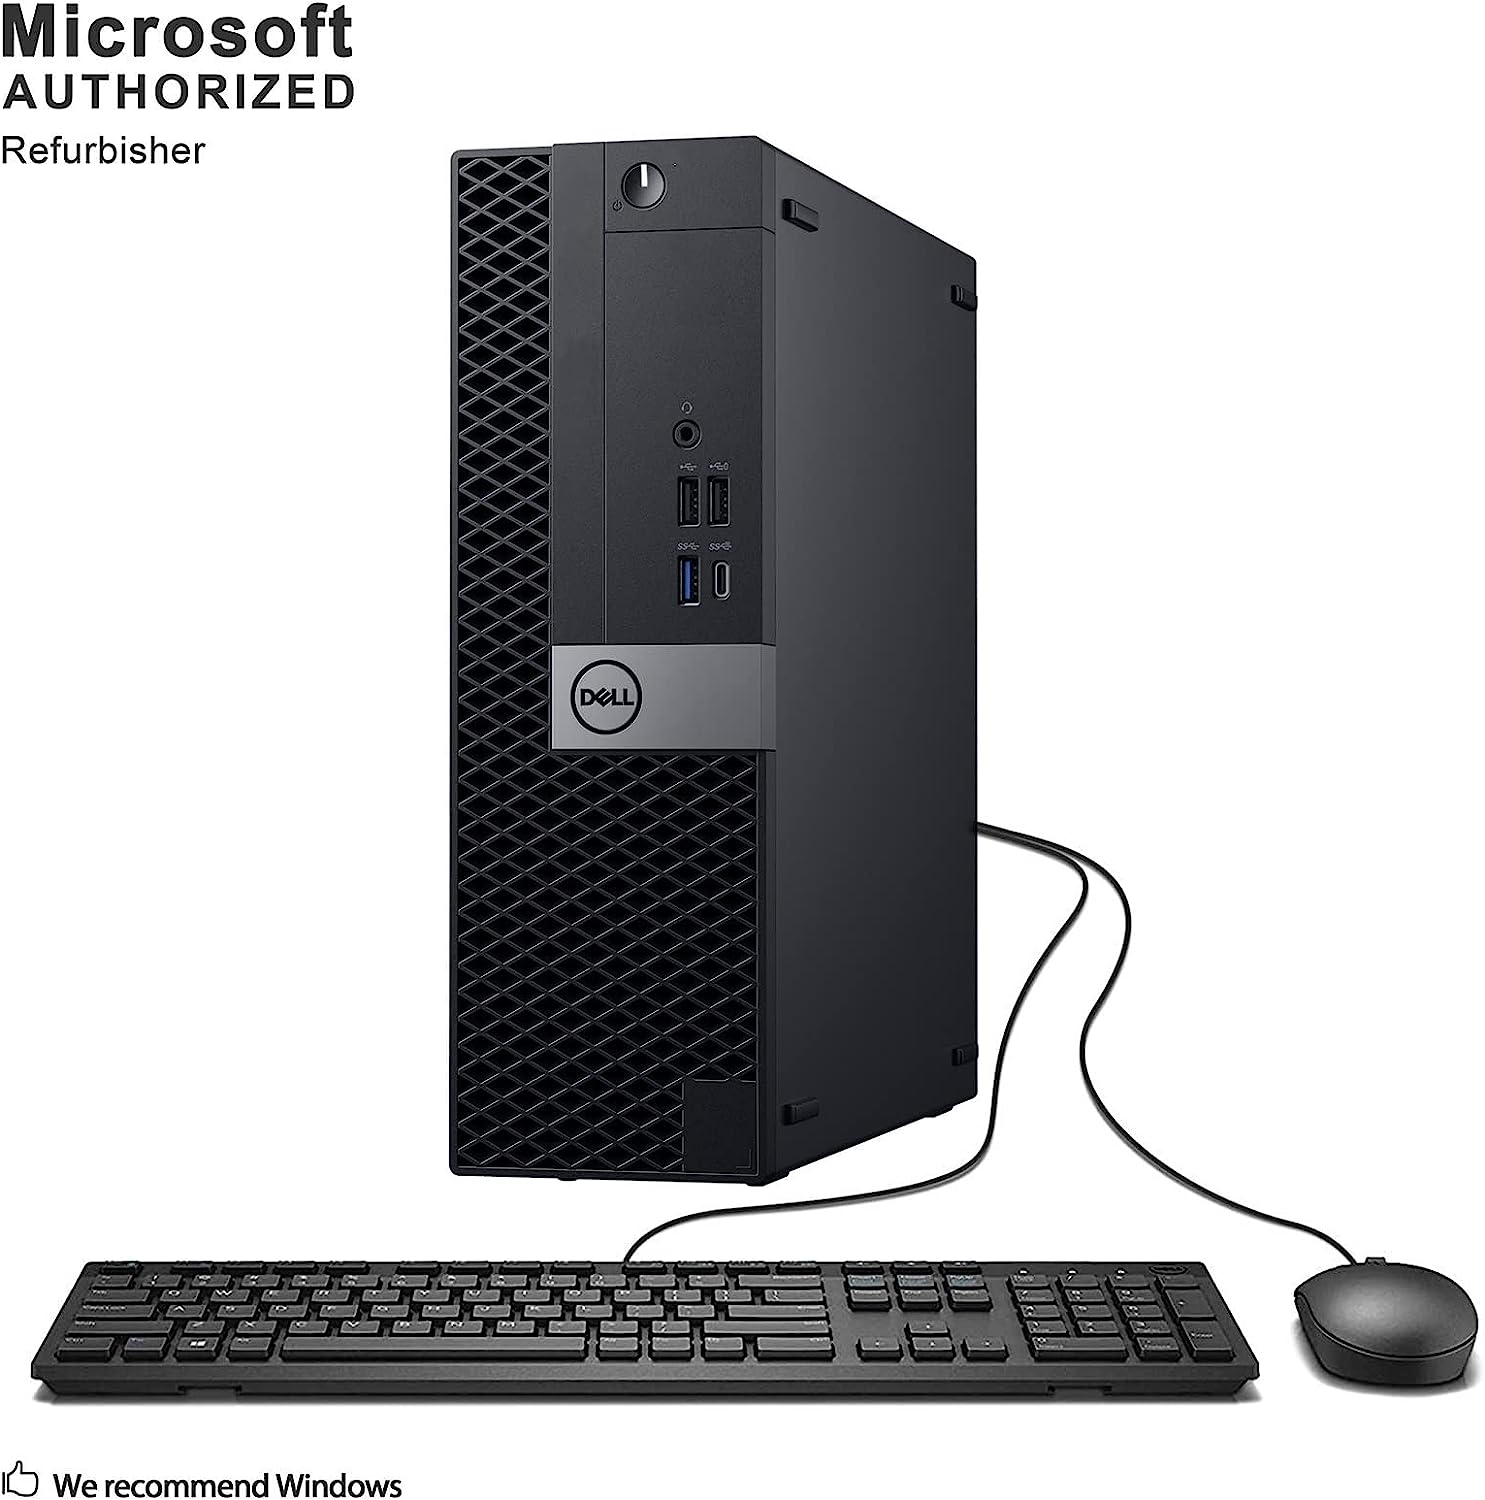 Dell Optiplex 7050 SFF Desktop PC Intel i7-7700 4-Cores 3.60GHz 32GB DDR4 1TB SSD WiFi BT HDMI Duel Monitor Support Windows 10 Pro Excellent Condition(Renewed)